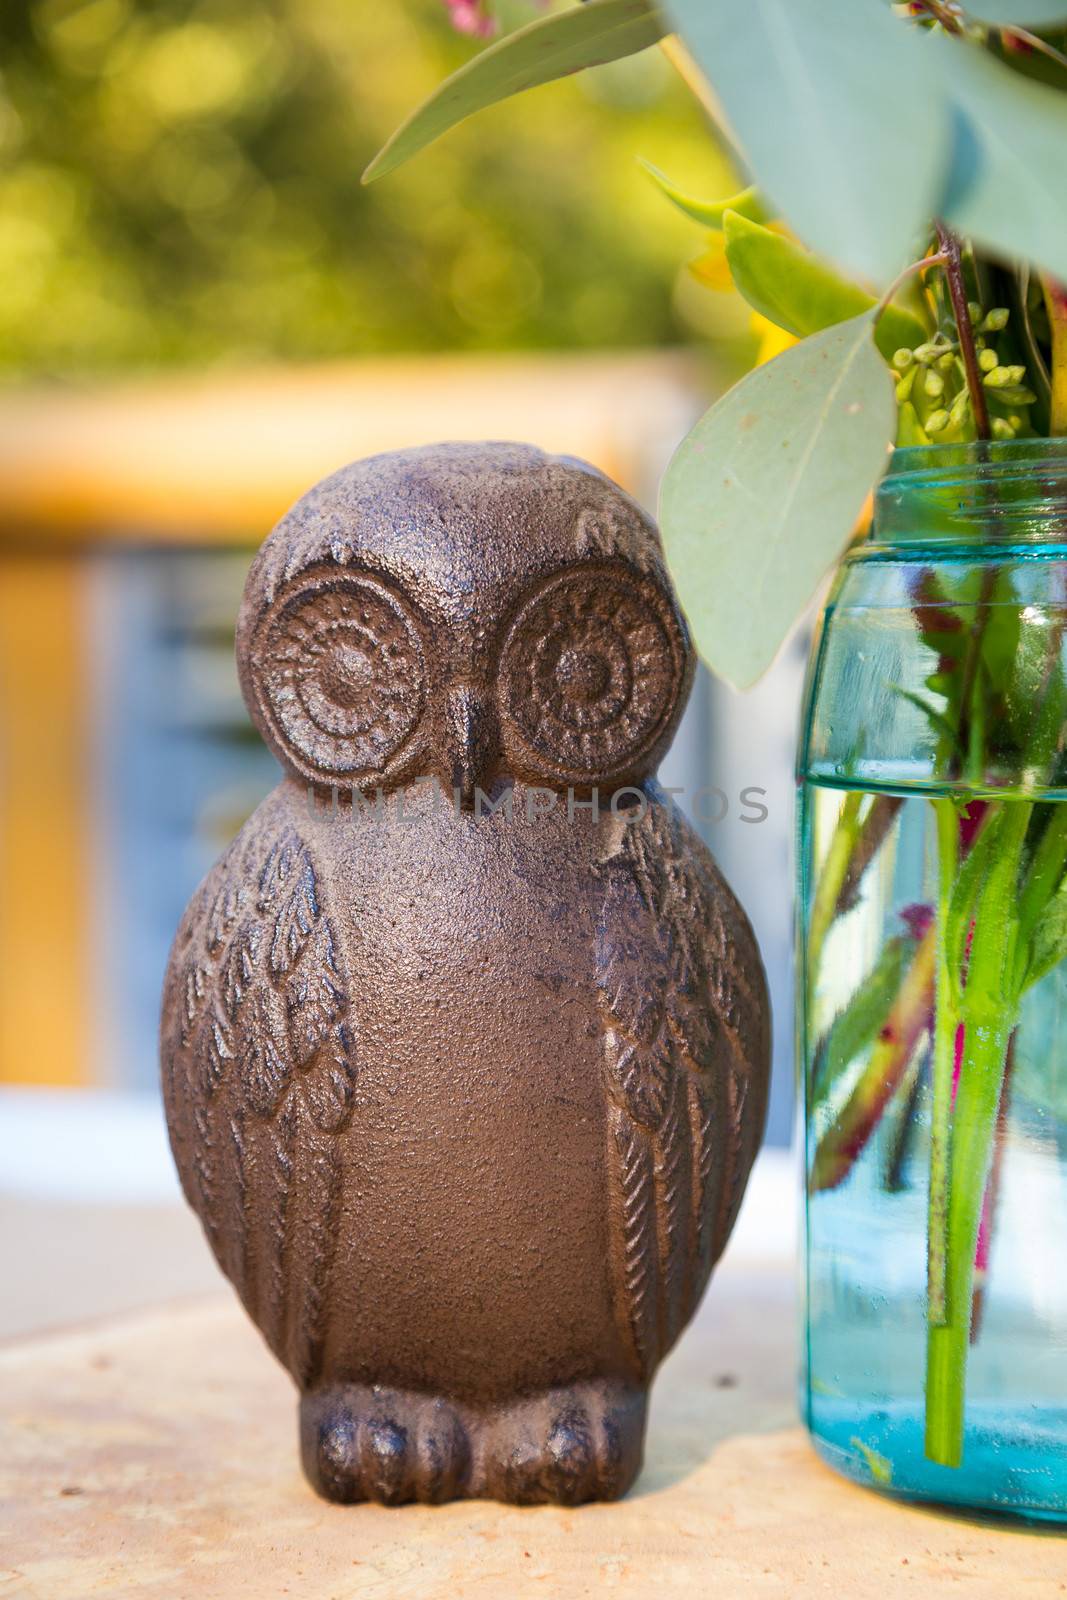 Centerpieces for this wedding include handmade wooden owls and flowers on the reception tables.